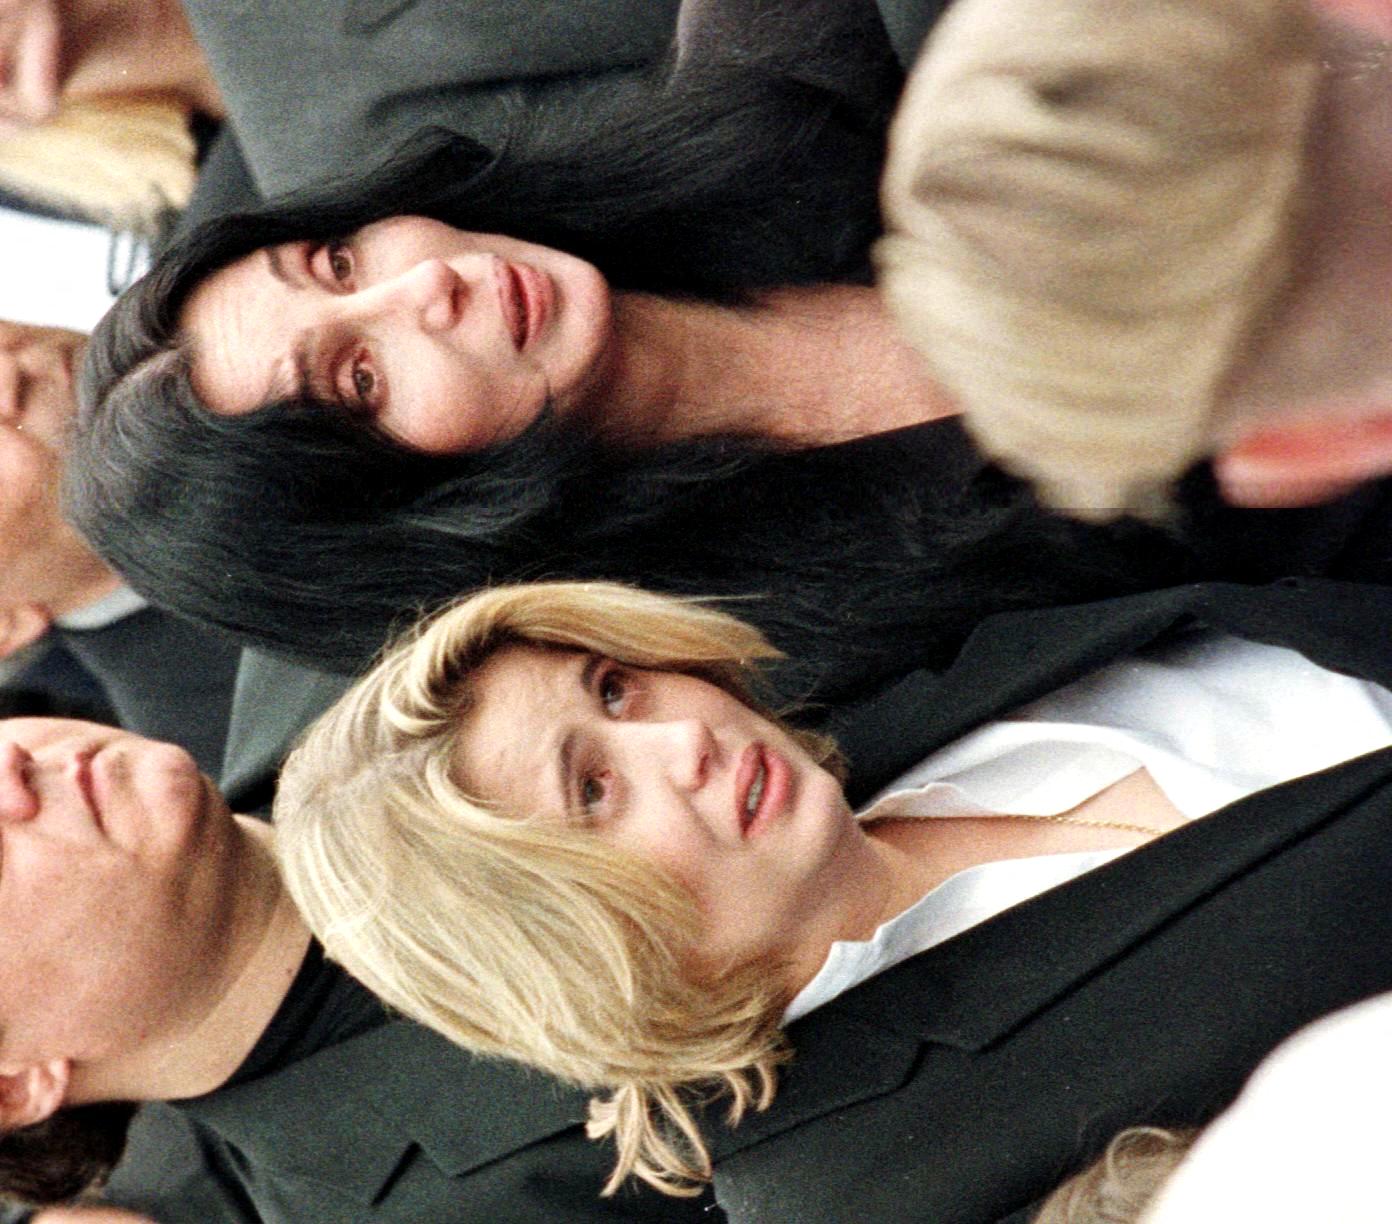 Cher at Sonny Bono's funeral service with their daughter Chastity on January 9, 1998 in Palm Springs, California | Source: Getty Images